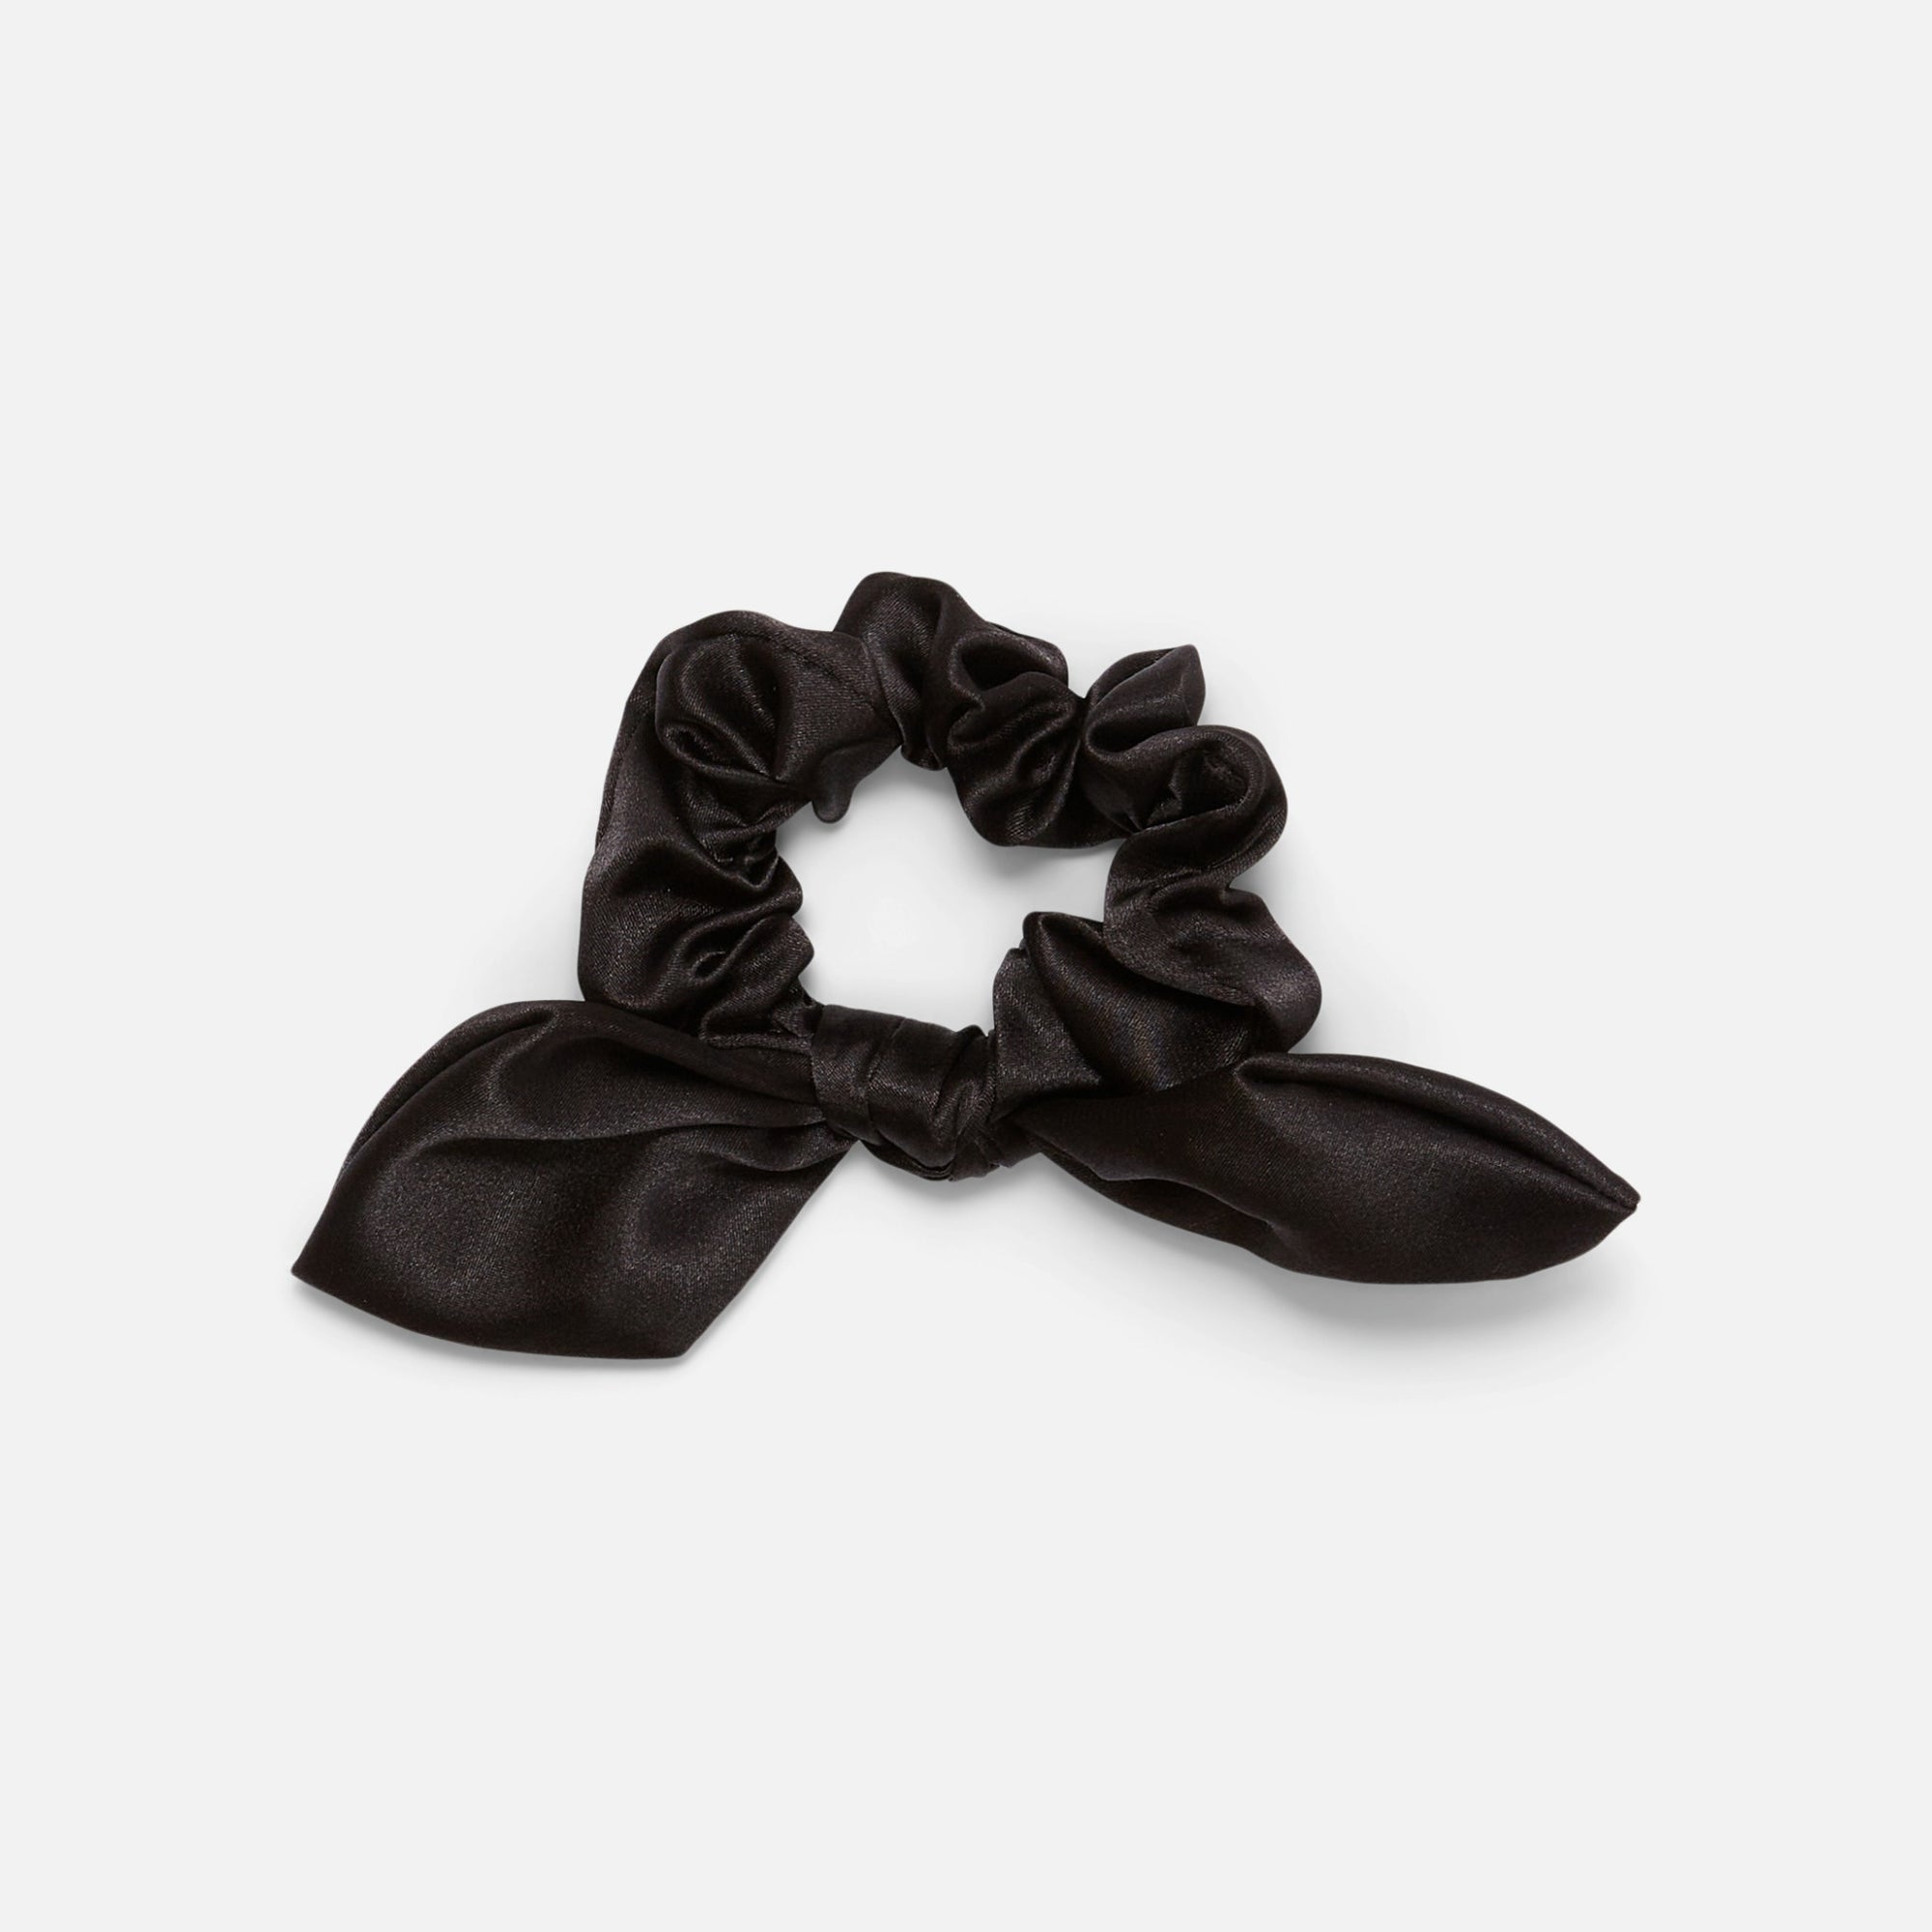 Set of 2 scrunchies in black and animal print with bows